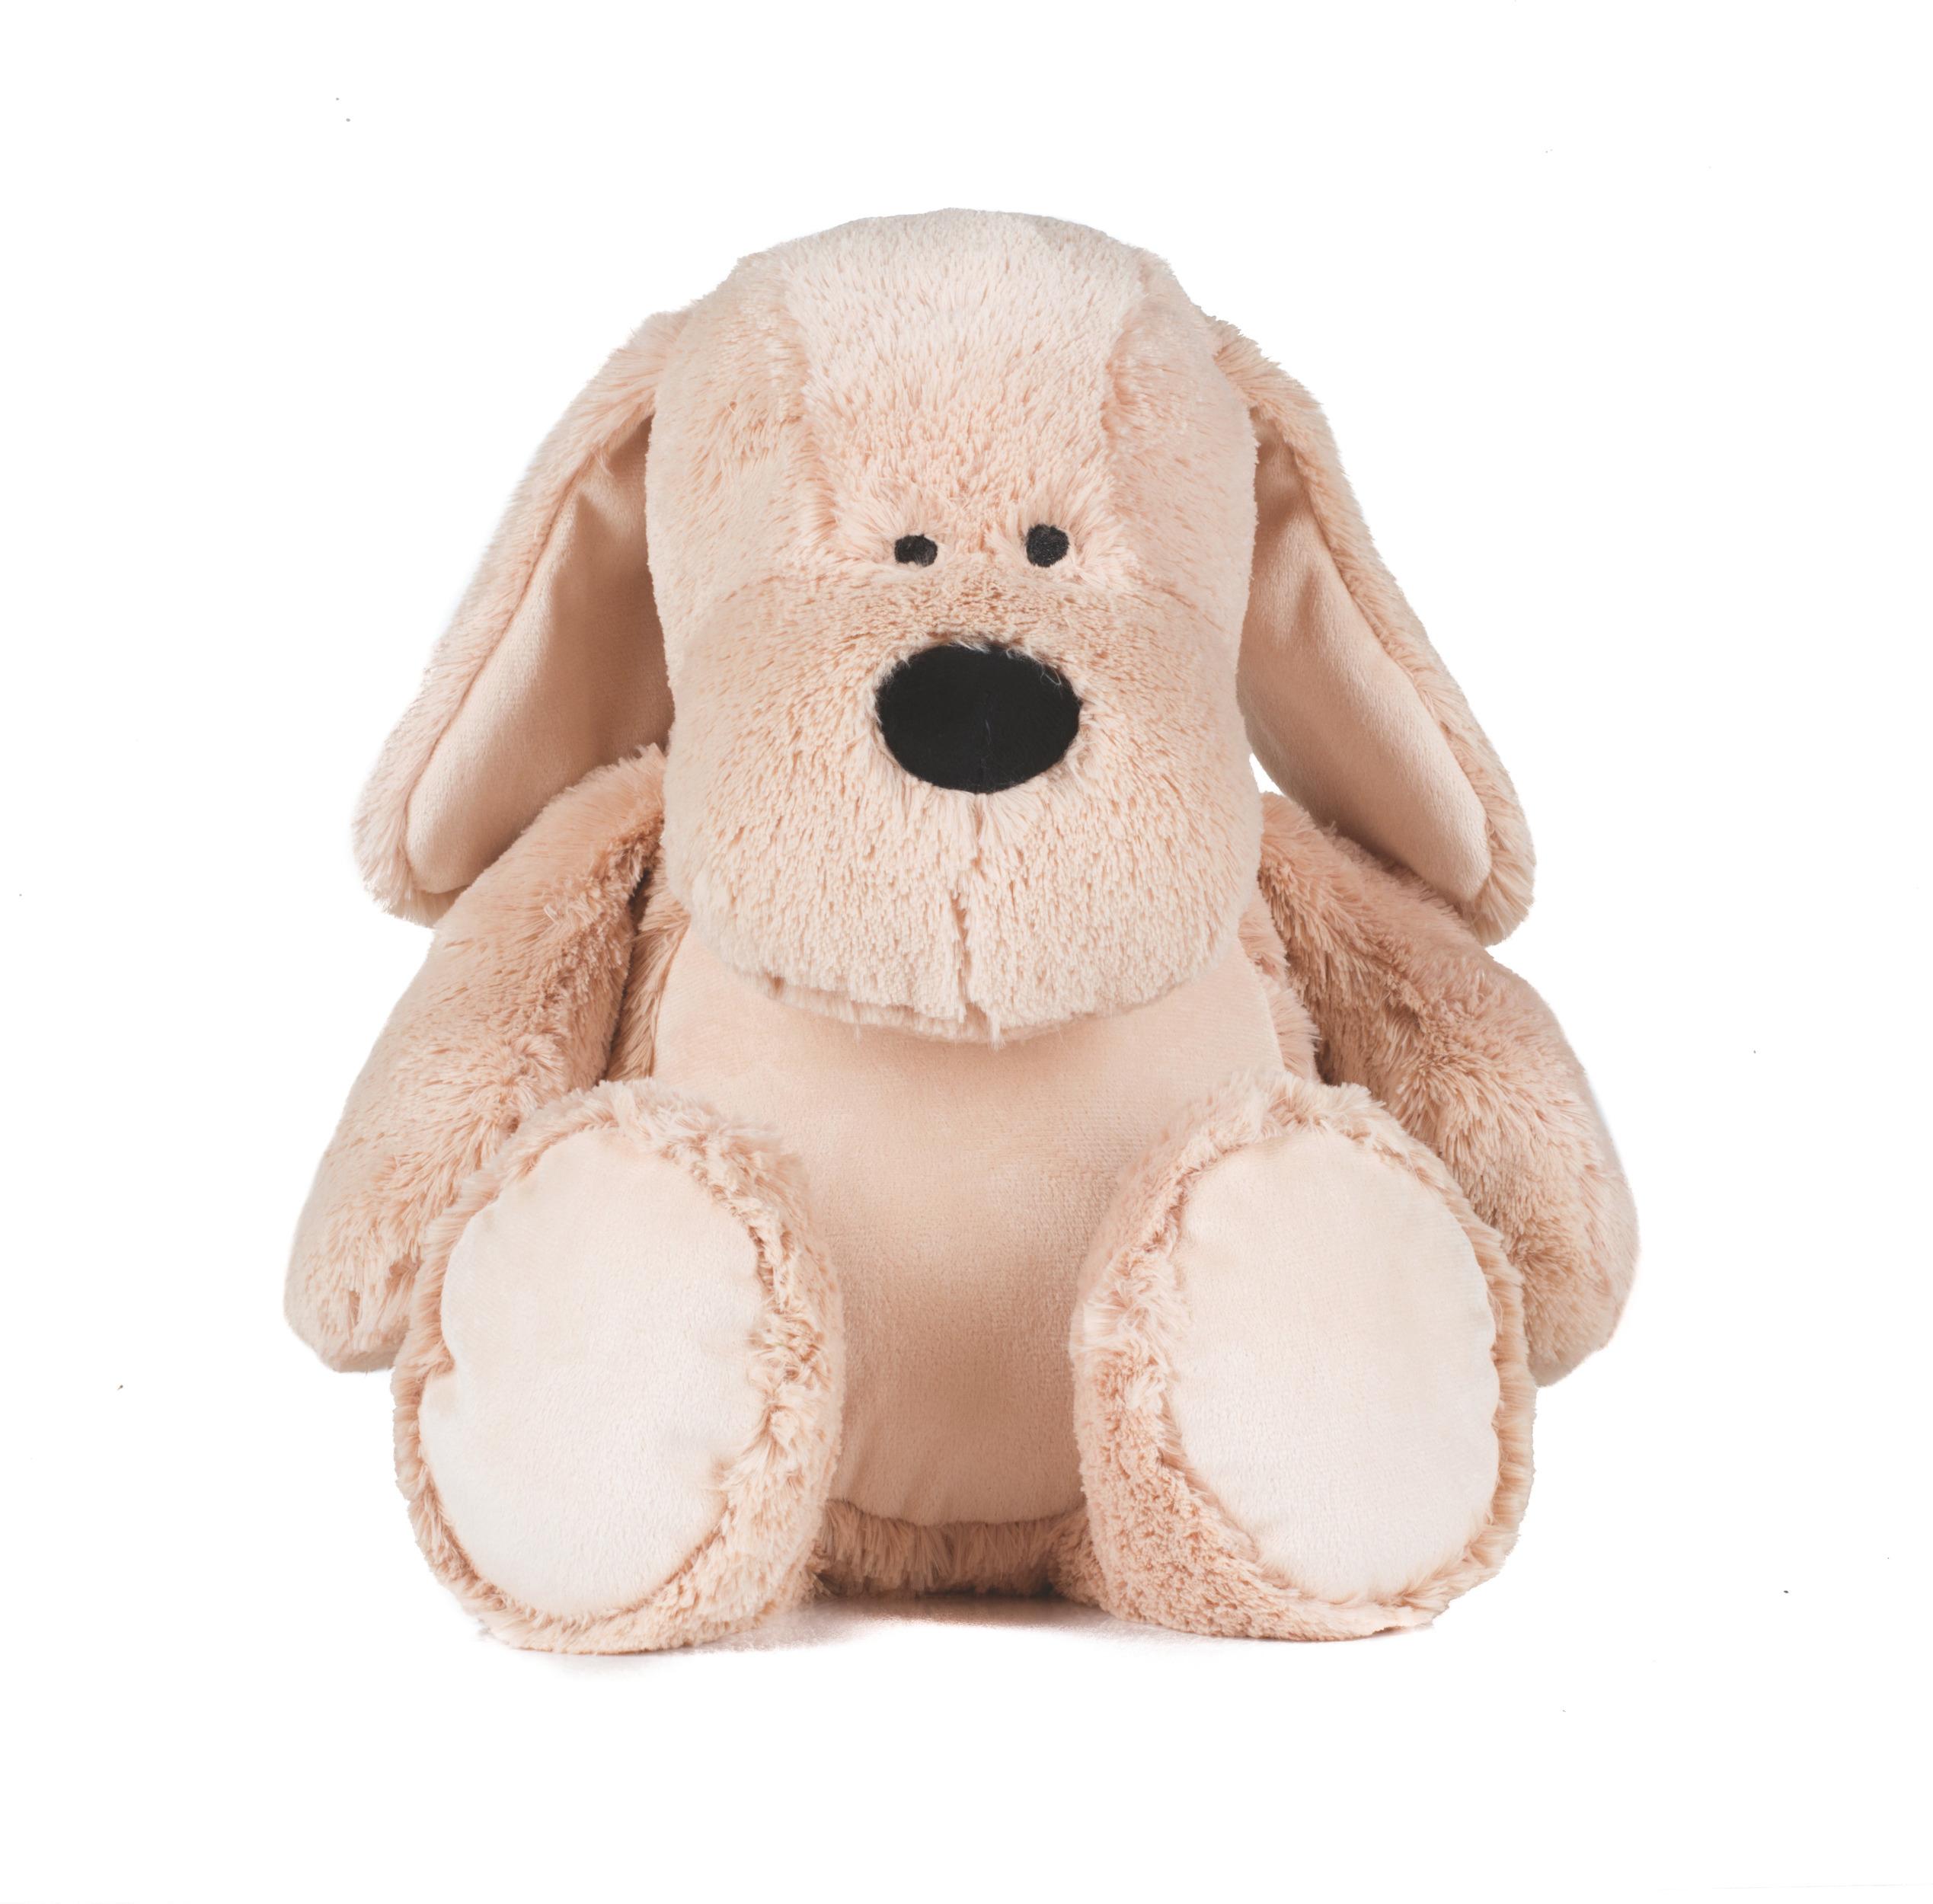 pictoEmbroidered Dog Plush - The Super Cute Puppy! Mid Brown